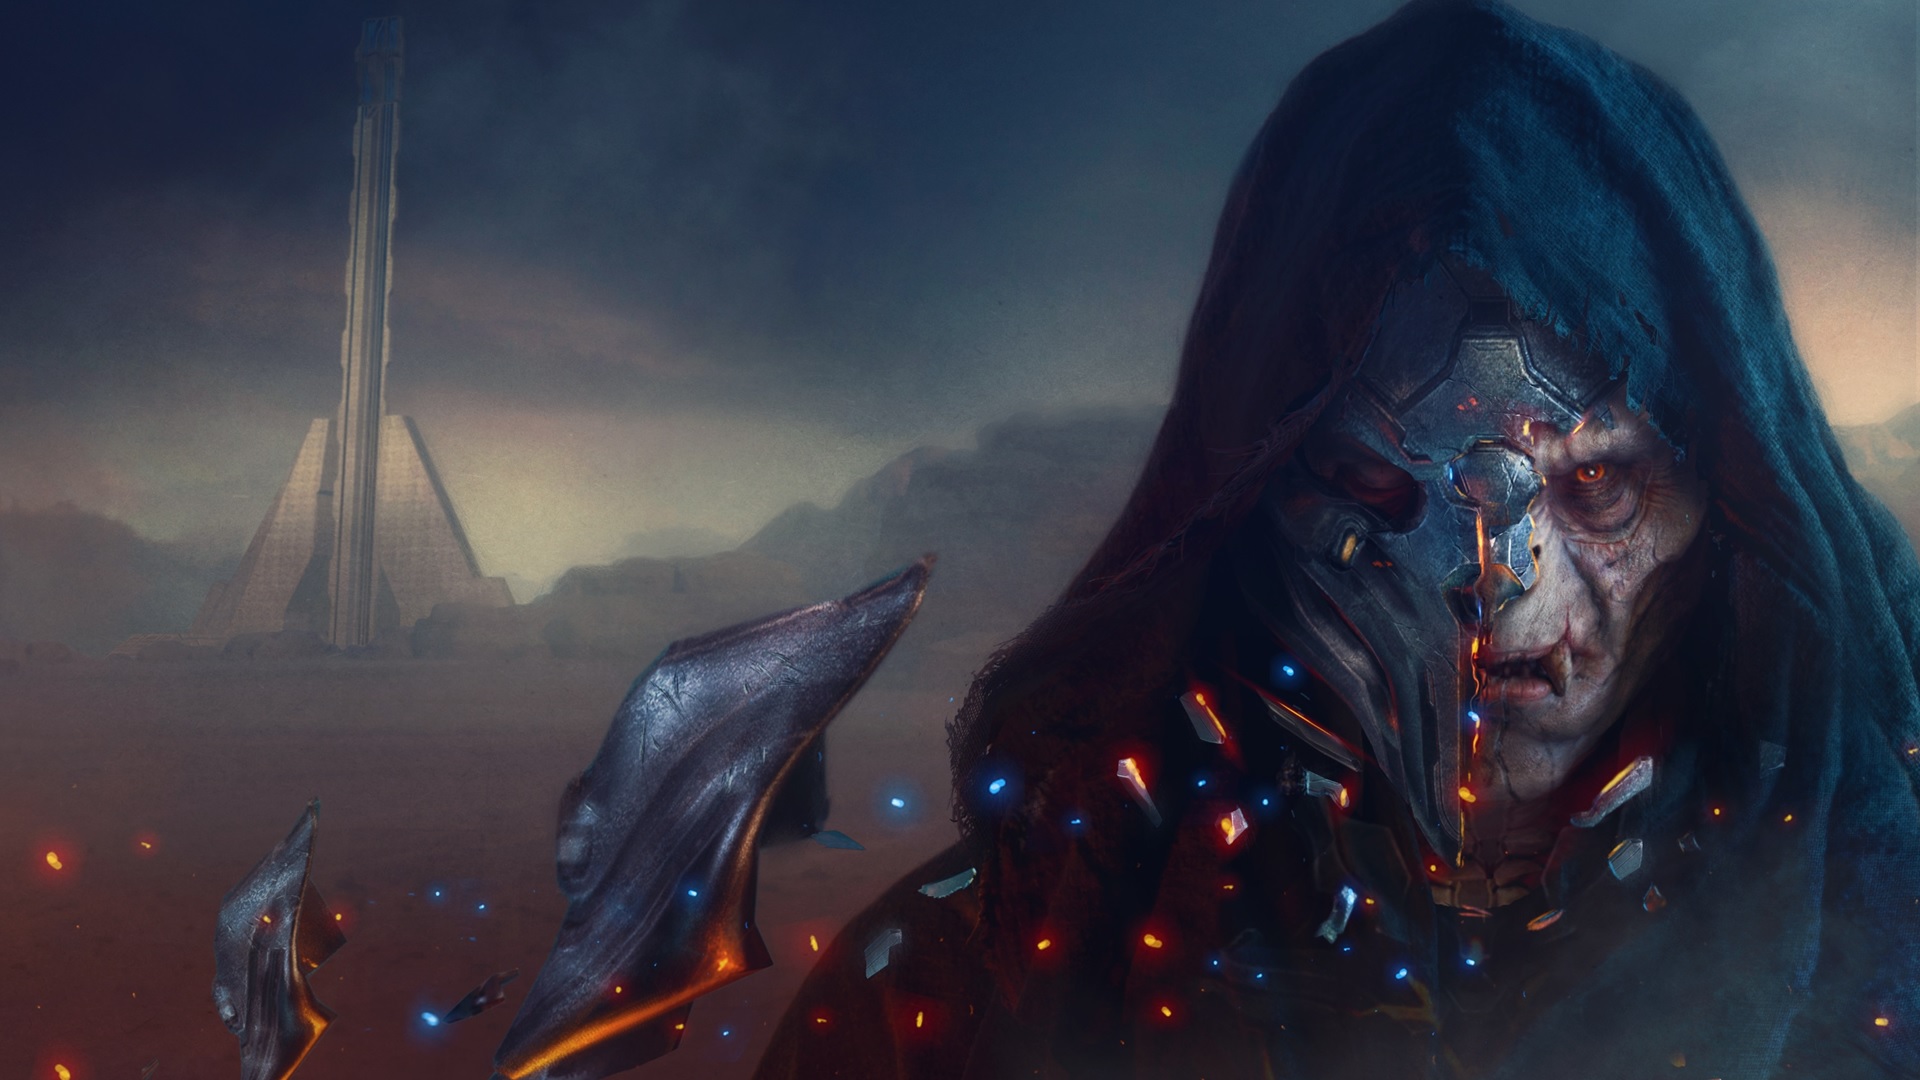 Cover art of Halo: Epitaph by Chris McGrath depicting the hooded figure of the Didact with half a broken helmet in a desert environment, the tower of Halo 3's map Epitaph in the background